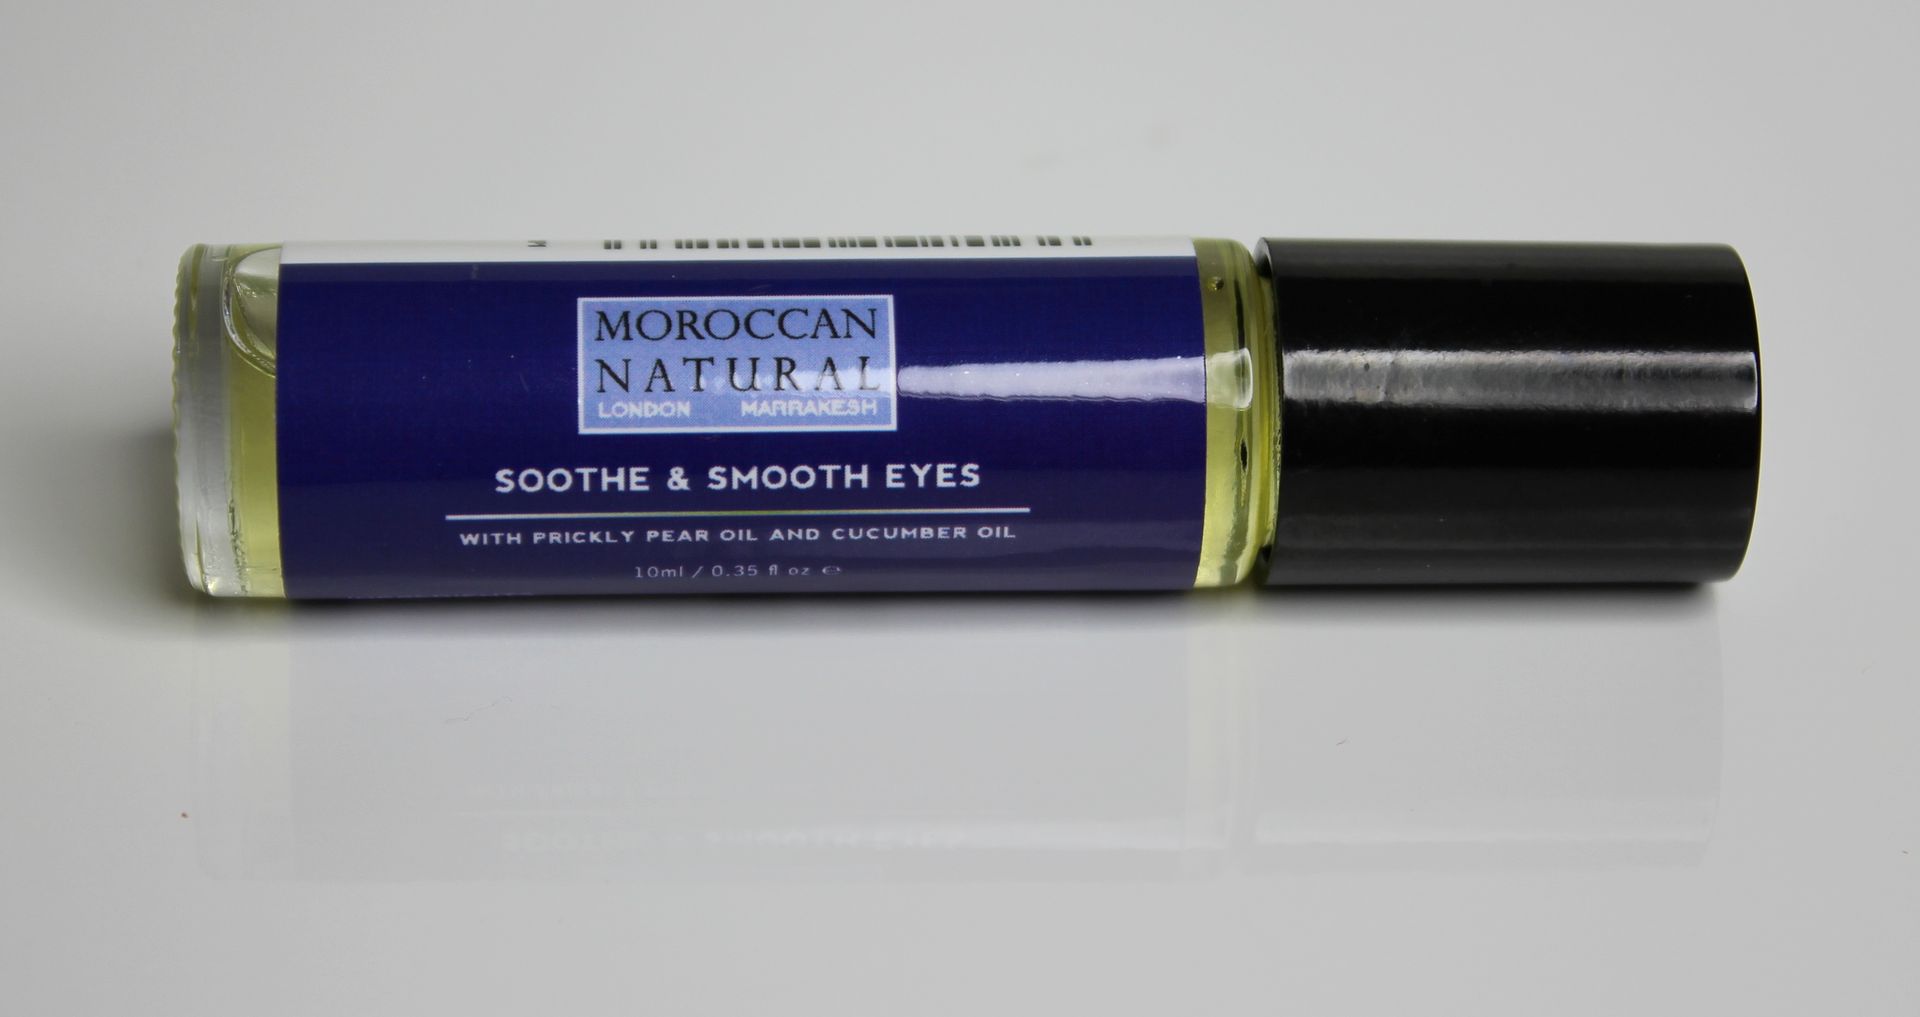 Moroccan Natural Soothe & Smooth Eyes